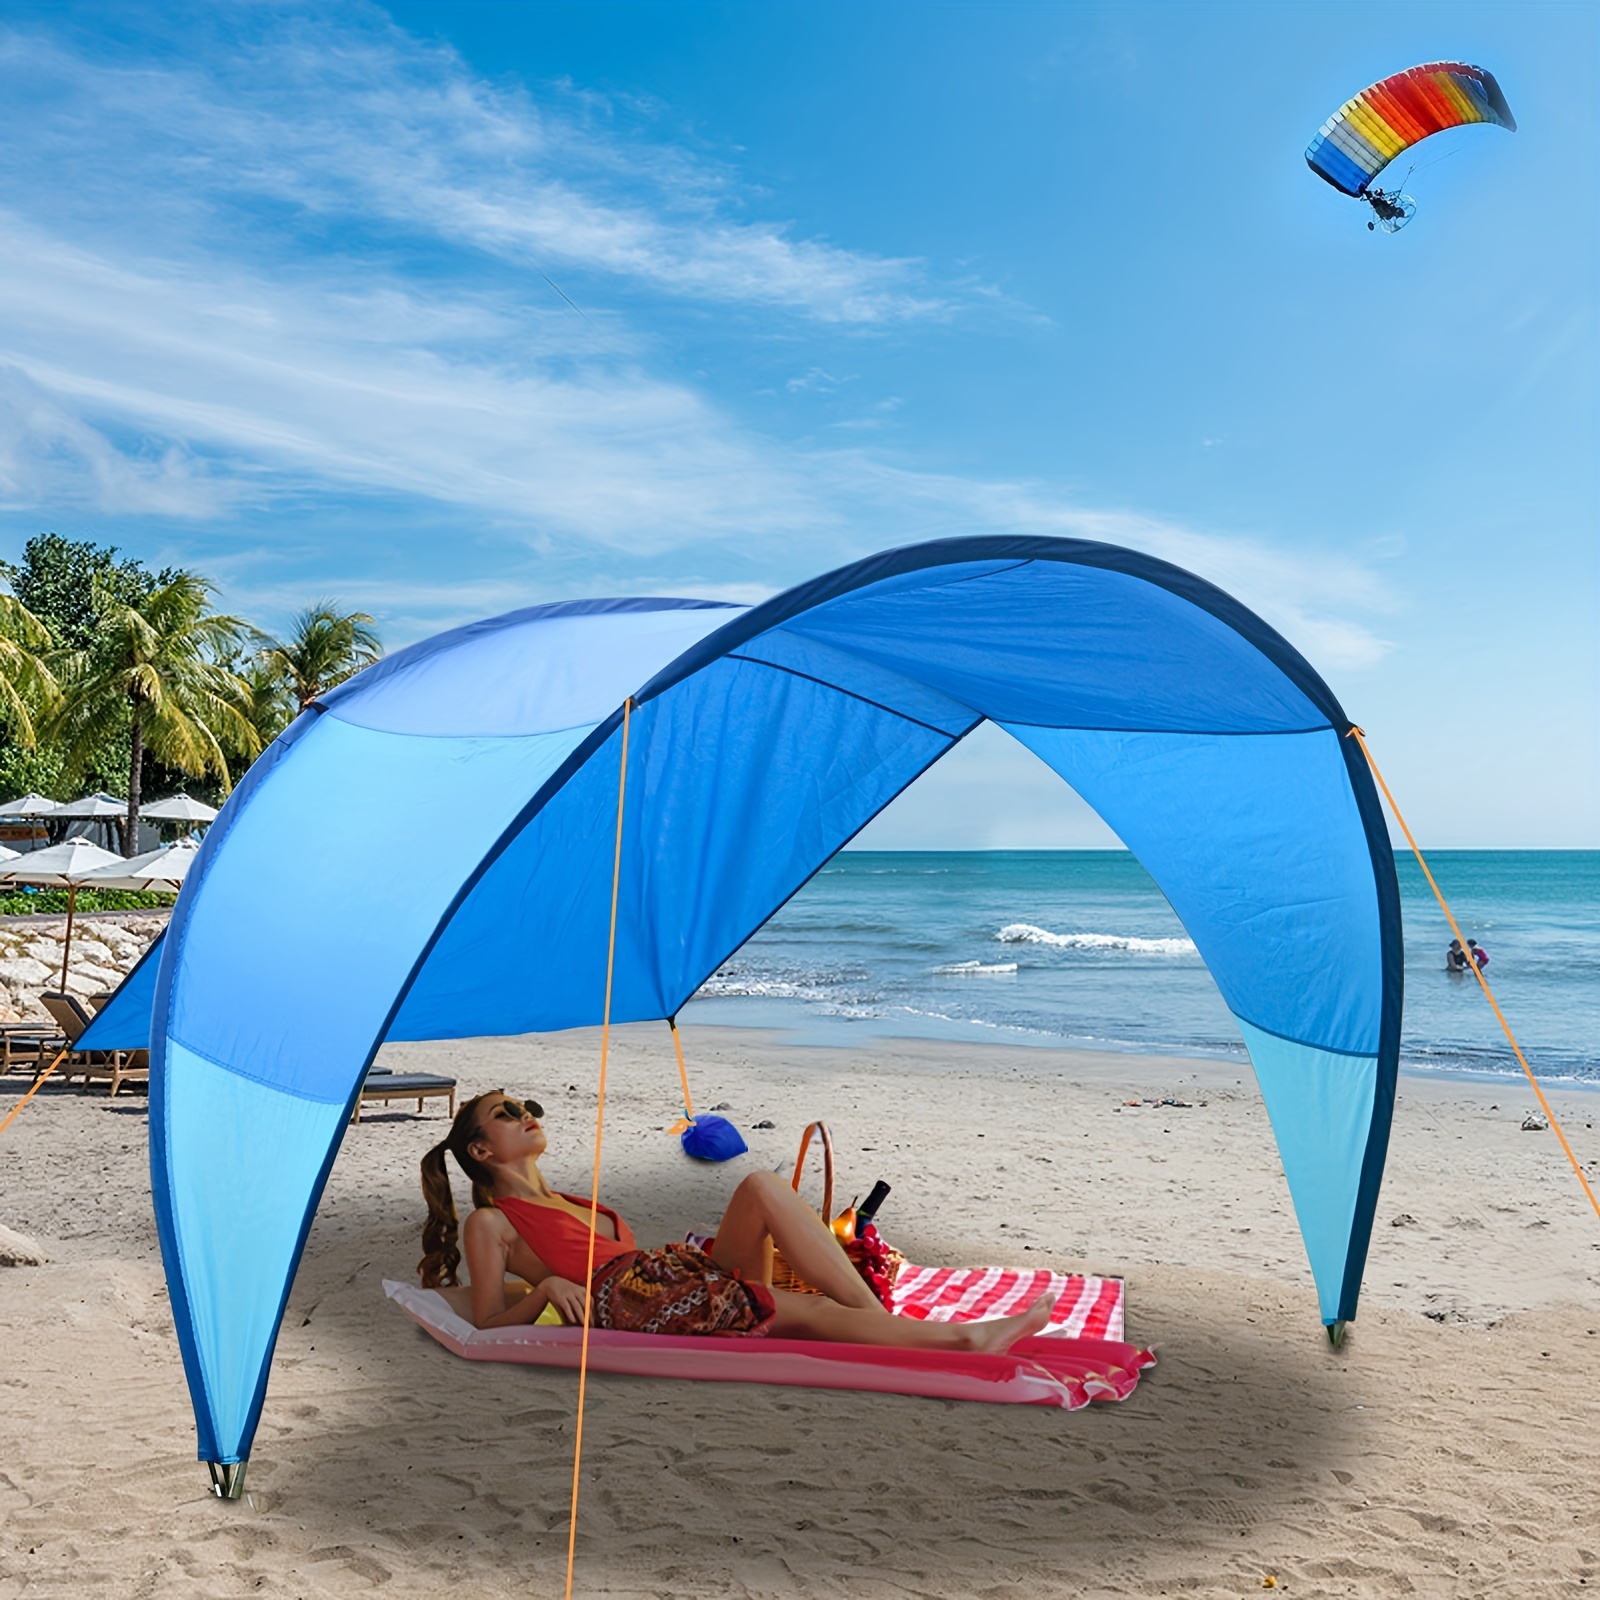 1pc Large Beach Tent for 4-6 Adults - UV Protection Sun Shelter for  Camping, Picnics, and Outdoor Activities - Easy Set Up and Portable Design